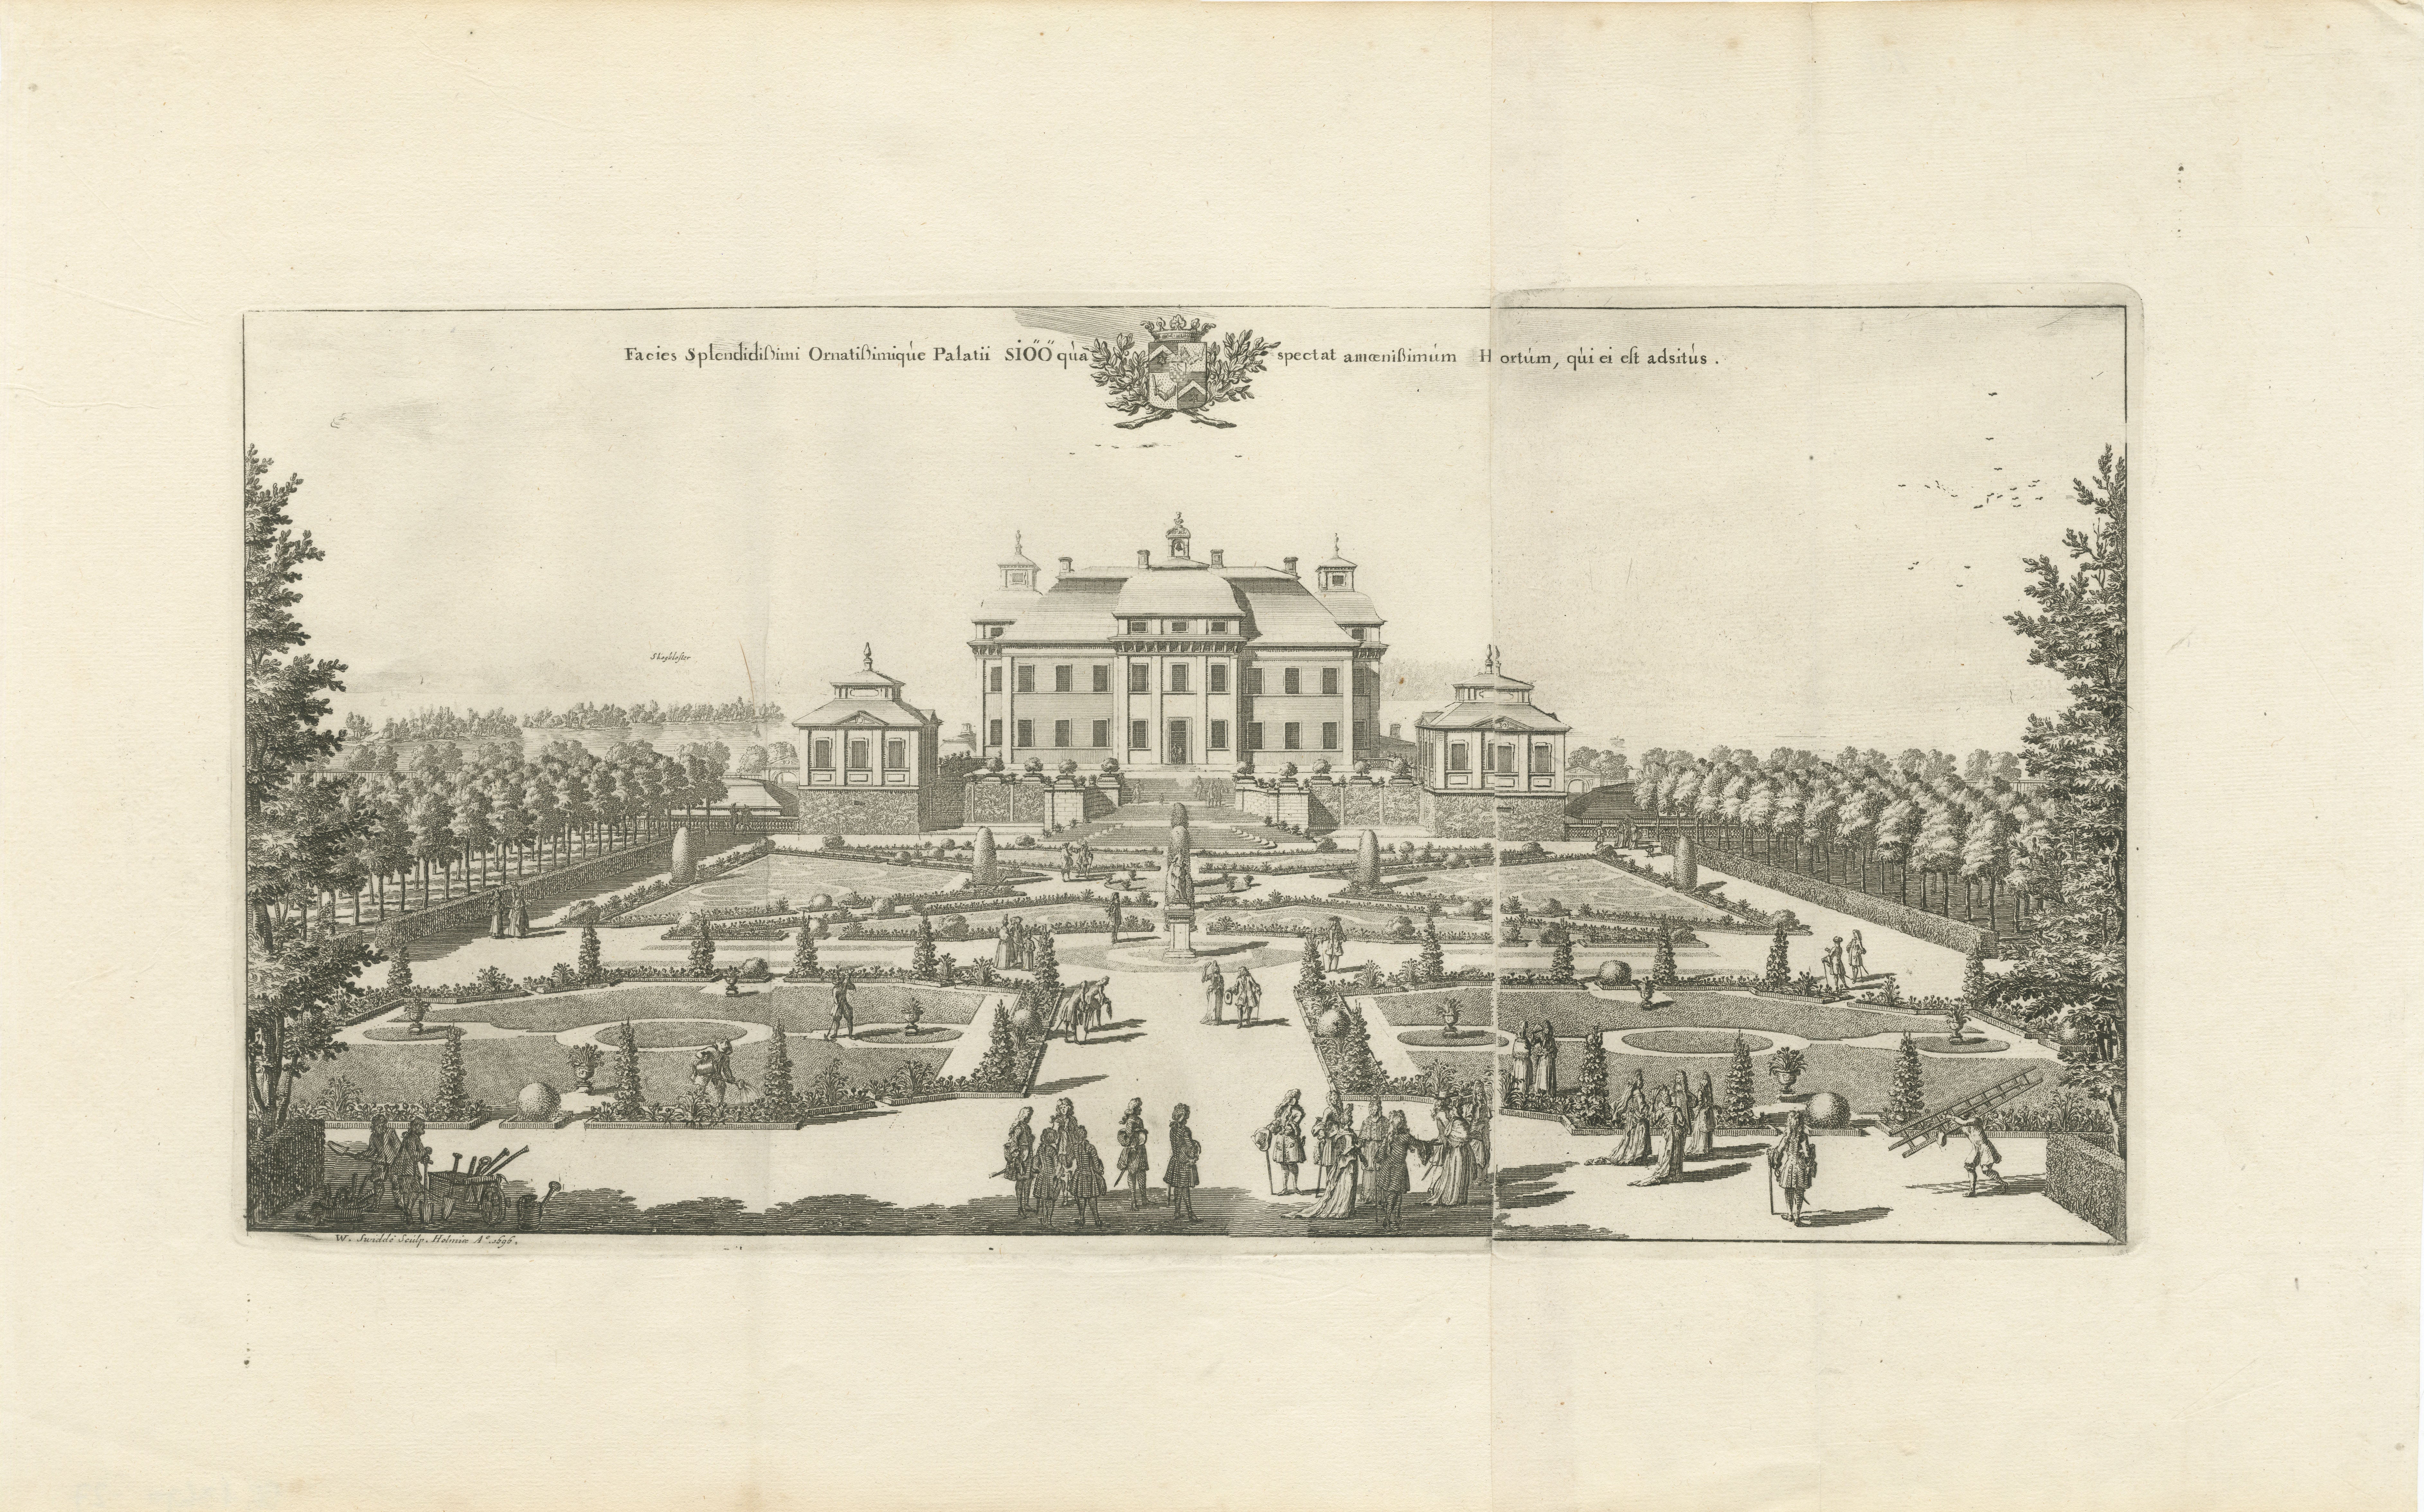 The engraving depicts a grand manor house surrounded by formal gardens. It is titled 